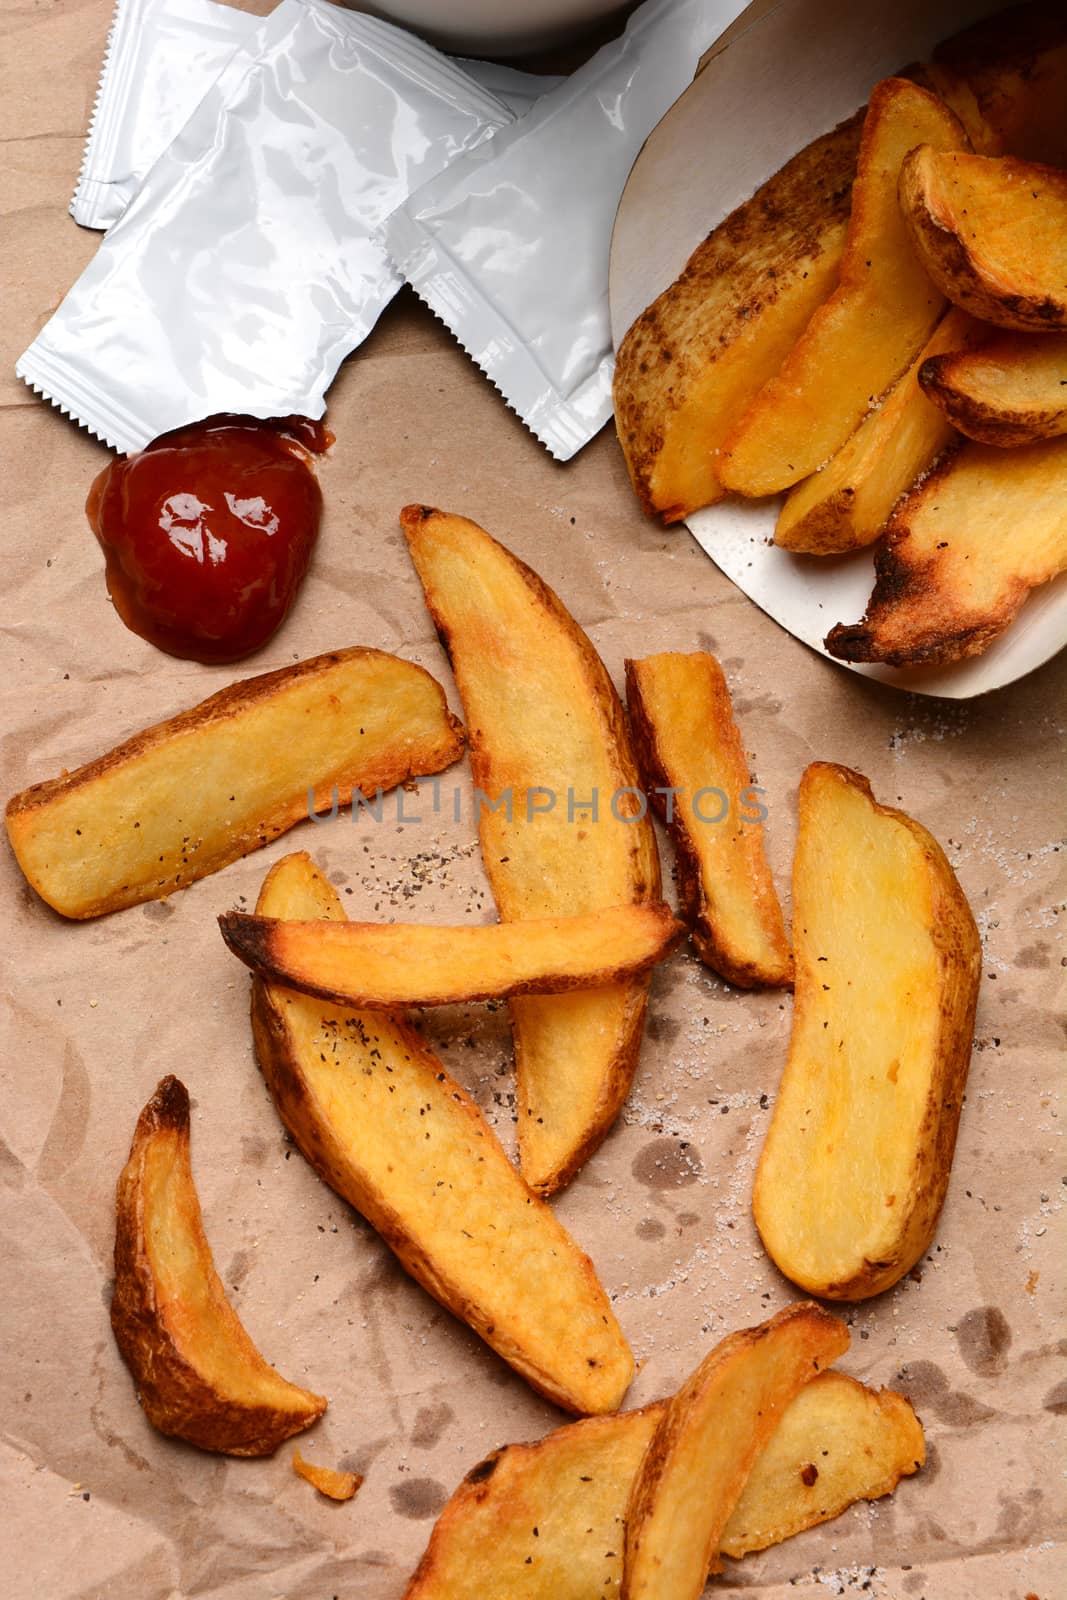 French Fries With Ketchup on Brown Bag by sCukrov